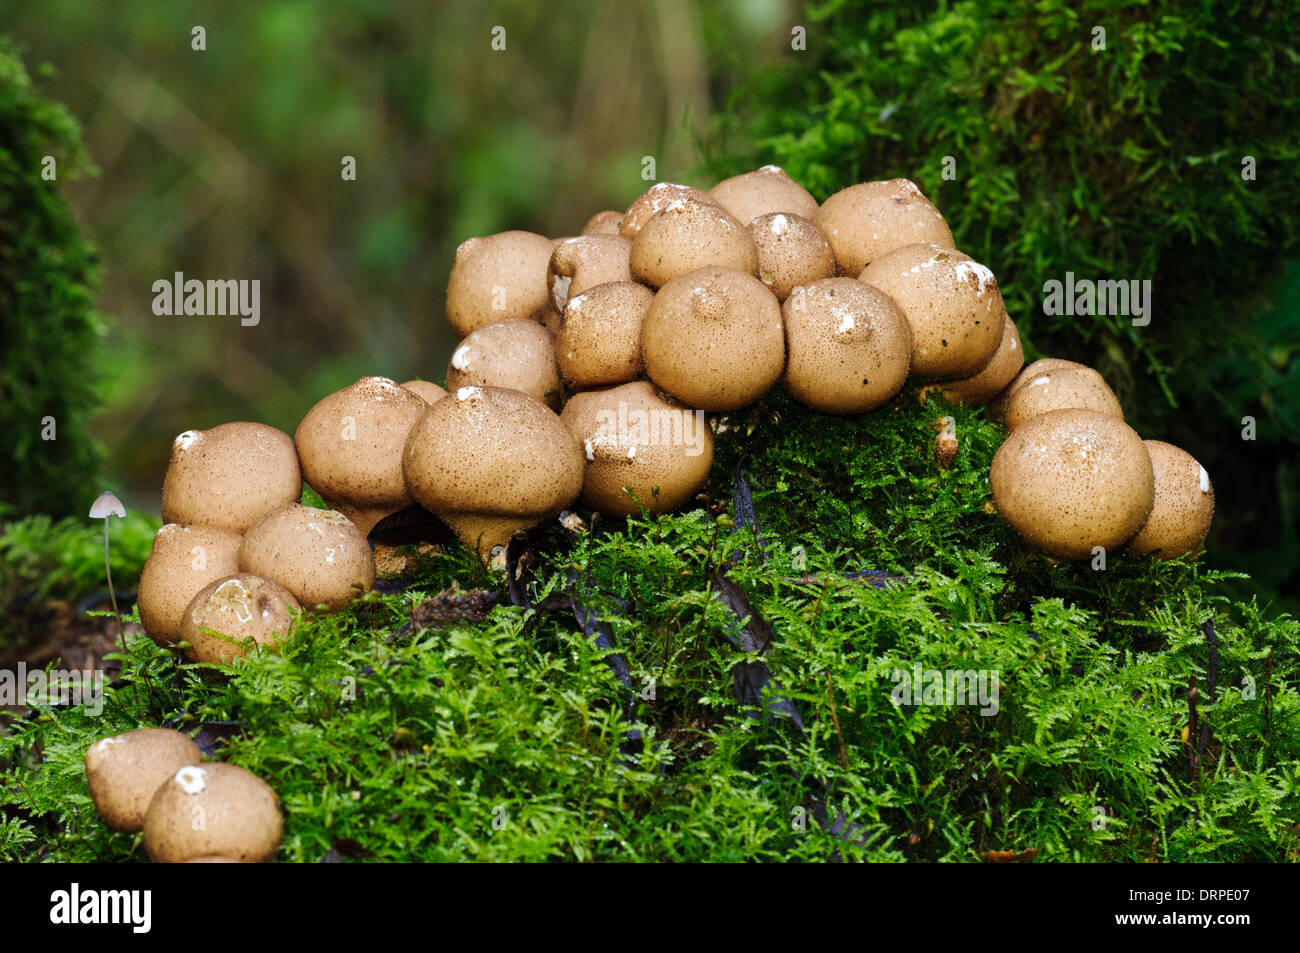 Stump Puffballs (Lycoperdon pyriforme), group of fruiting bodies growing on a moss-covered tree stump at Potteric Carr Stock Photo